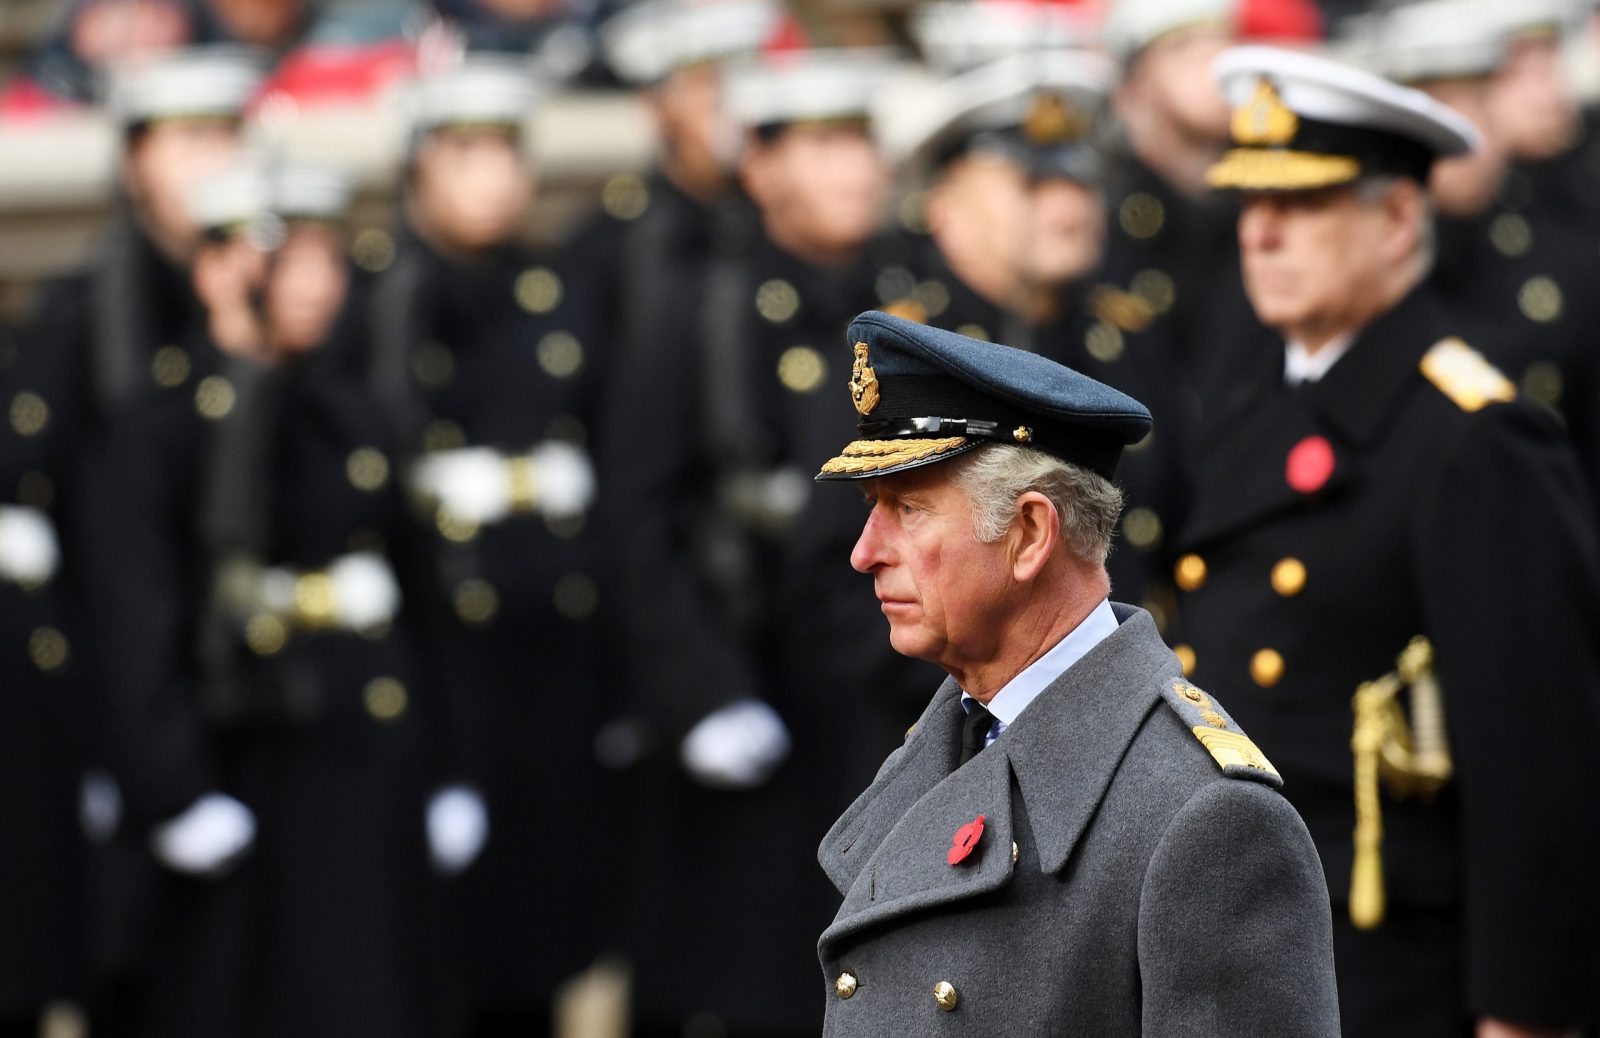 epa10171327 (FILE) - Britain's Charles, Prince of Wales during Remembrance Sunday service at the Cenotaph in London, Britain, 12 November 2017 (reissued 08 September 2022). According to a statement issued by Buckingham Palace on 08 September 2022, Britain's Queen Elizabeth II has died at her Scottish estate, Balmoral Castle, on 08 September 2022. The 96-year-old Queen was the longest-reigning monarch in British history. Her eldest son, Charles, Prince of Wales, the heir to the British throne, became king upon her death. Britain's new monarch will be known as King Charles III, Clarence House confirmed.  EPA/ANDY RAIN *** Local Caption *** 55280519